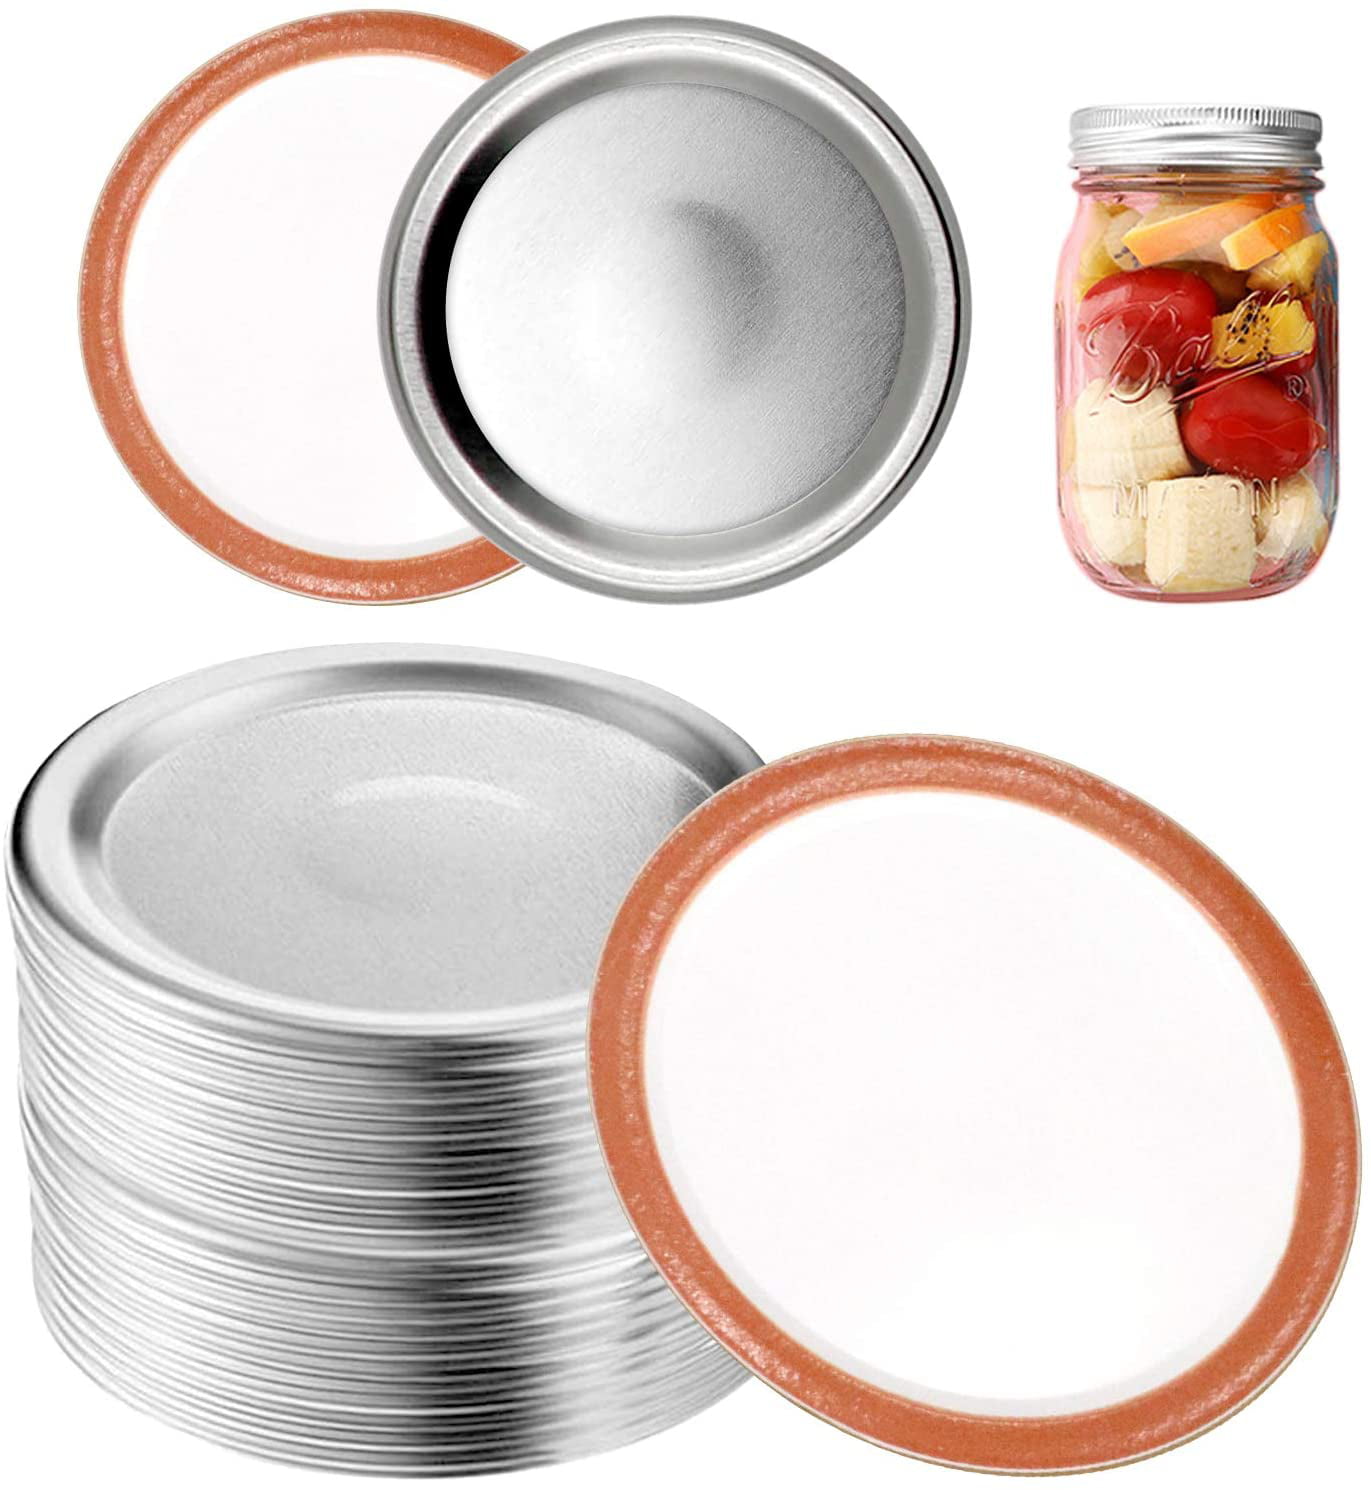 Alatic USA Made Split-Type Wide Mouth Canning Lids and Bands 12- Pack , 24 Pieces 86 mm